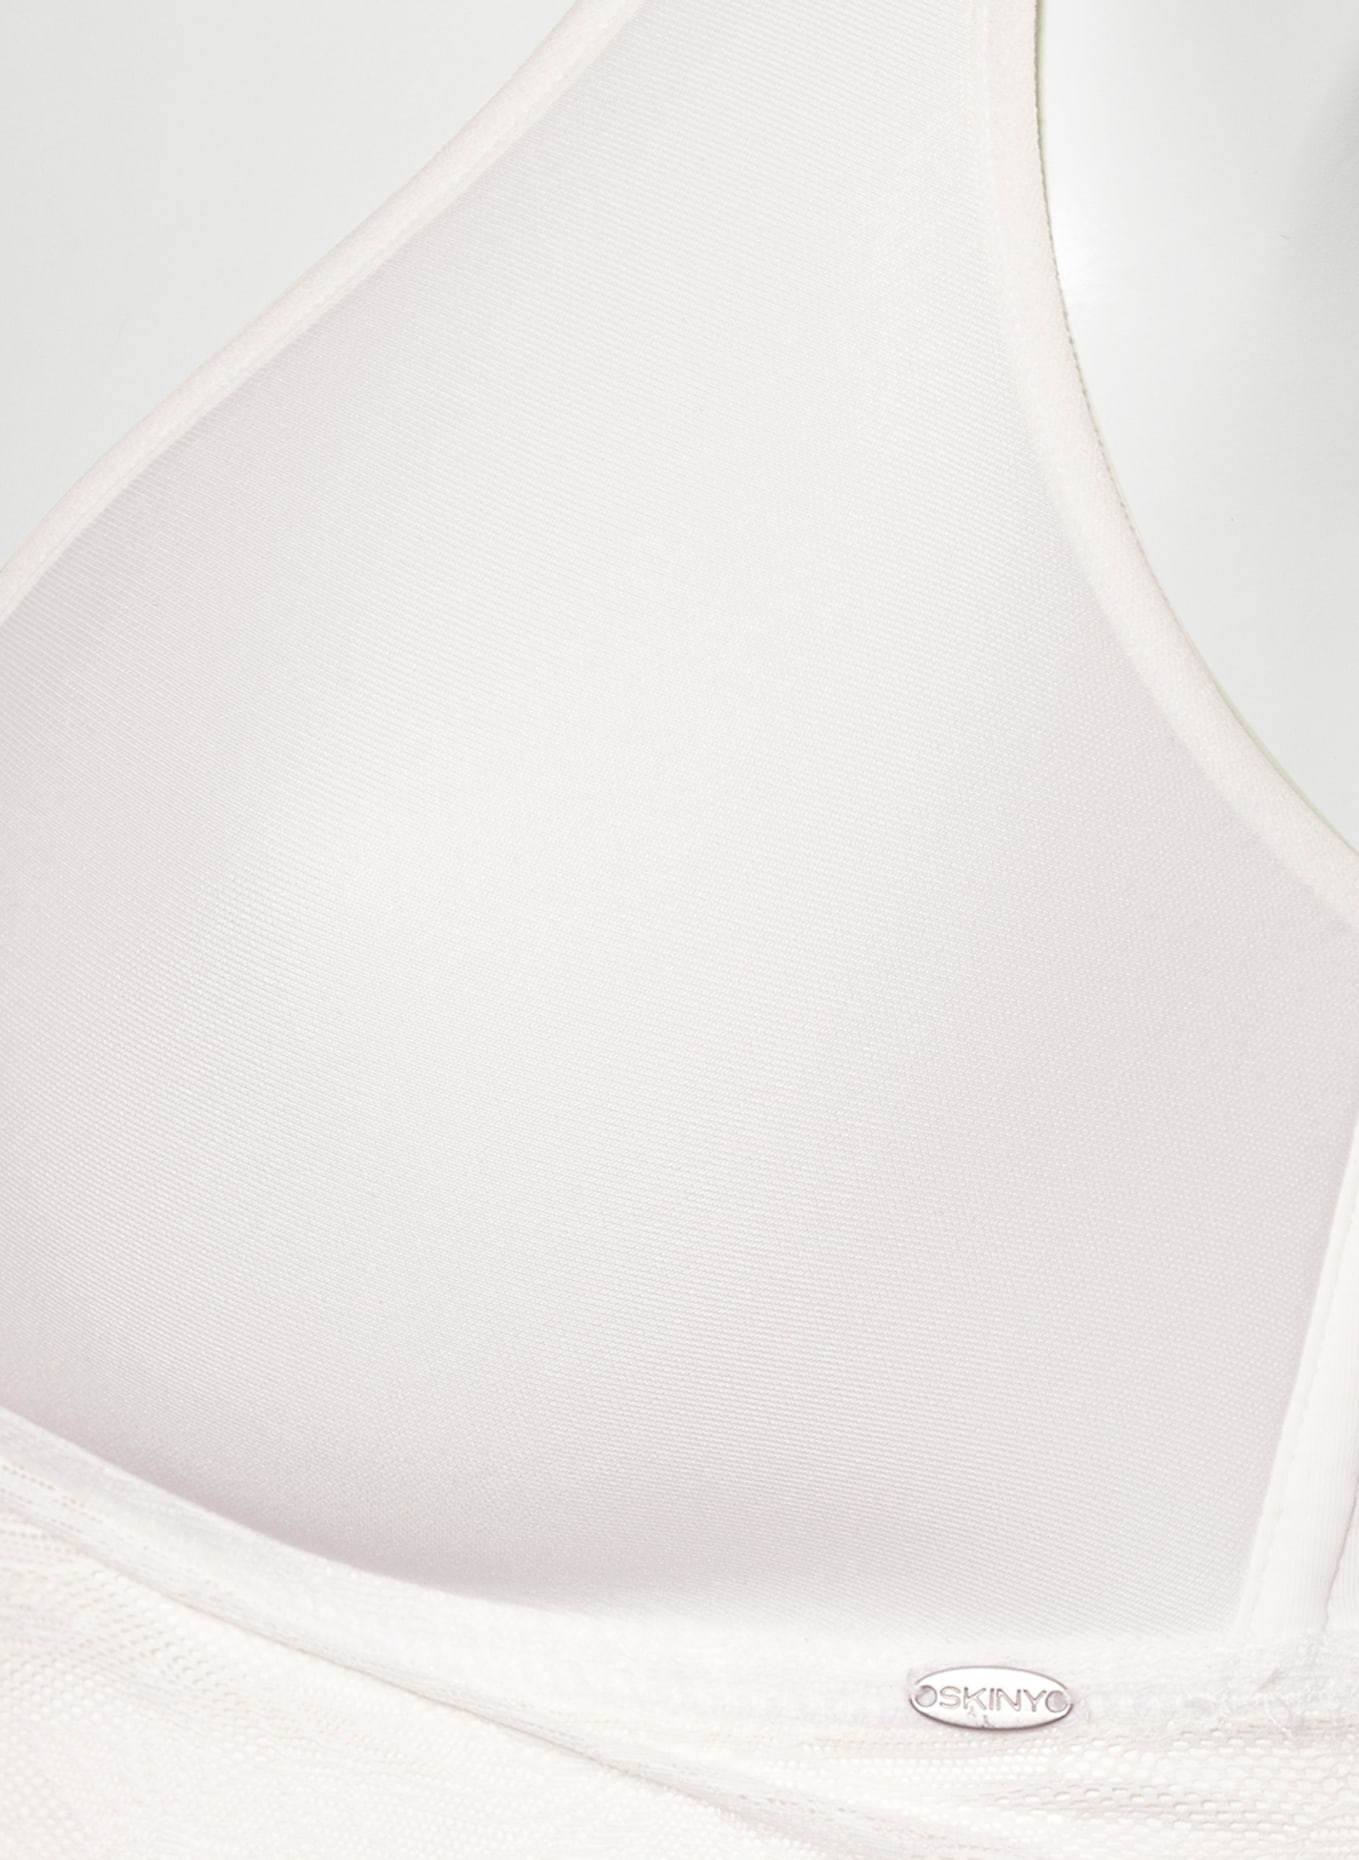 Skiny Triangle bra EVERY DAY IN MICRO LACE, Color: WHITE (Image 4)